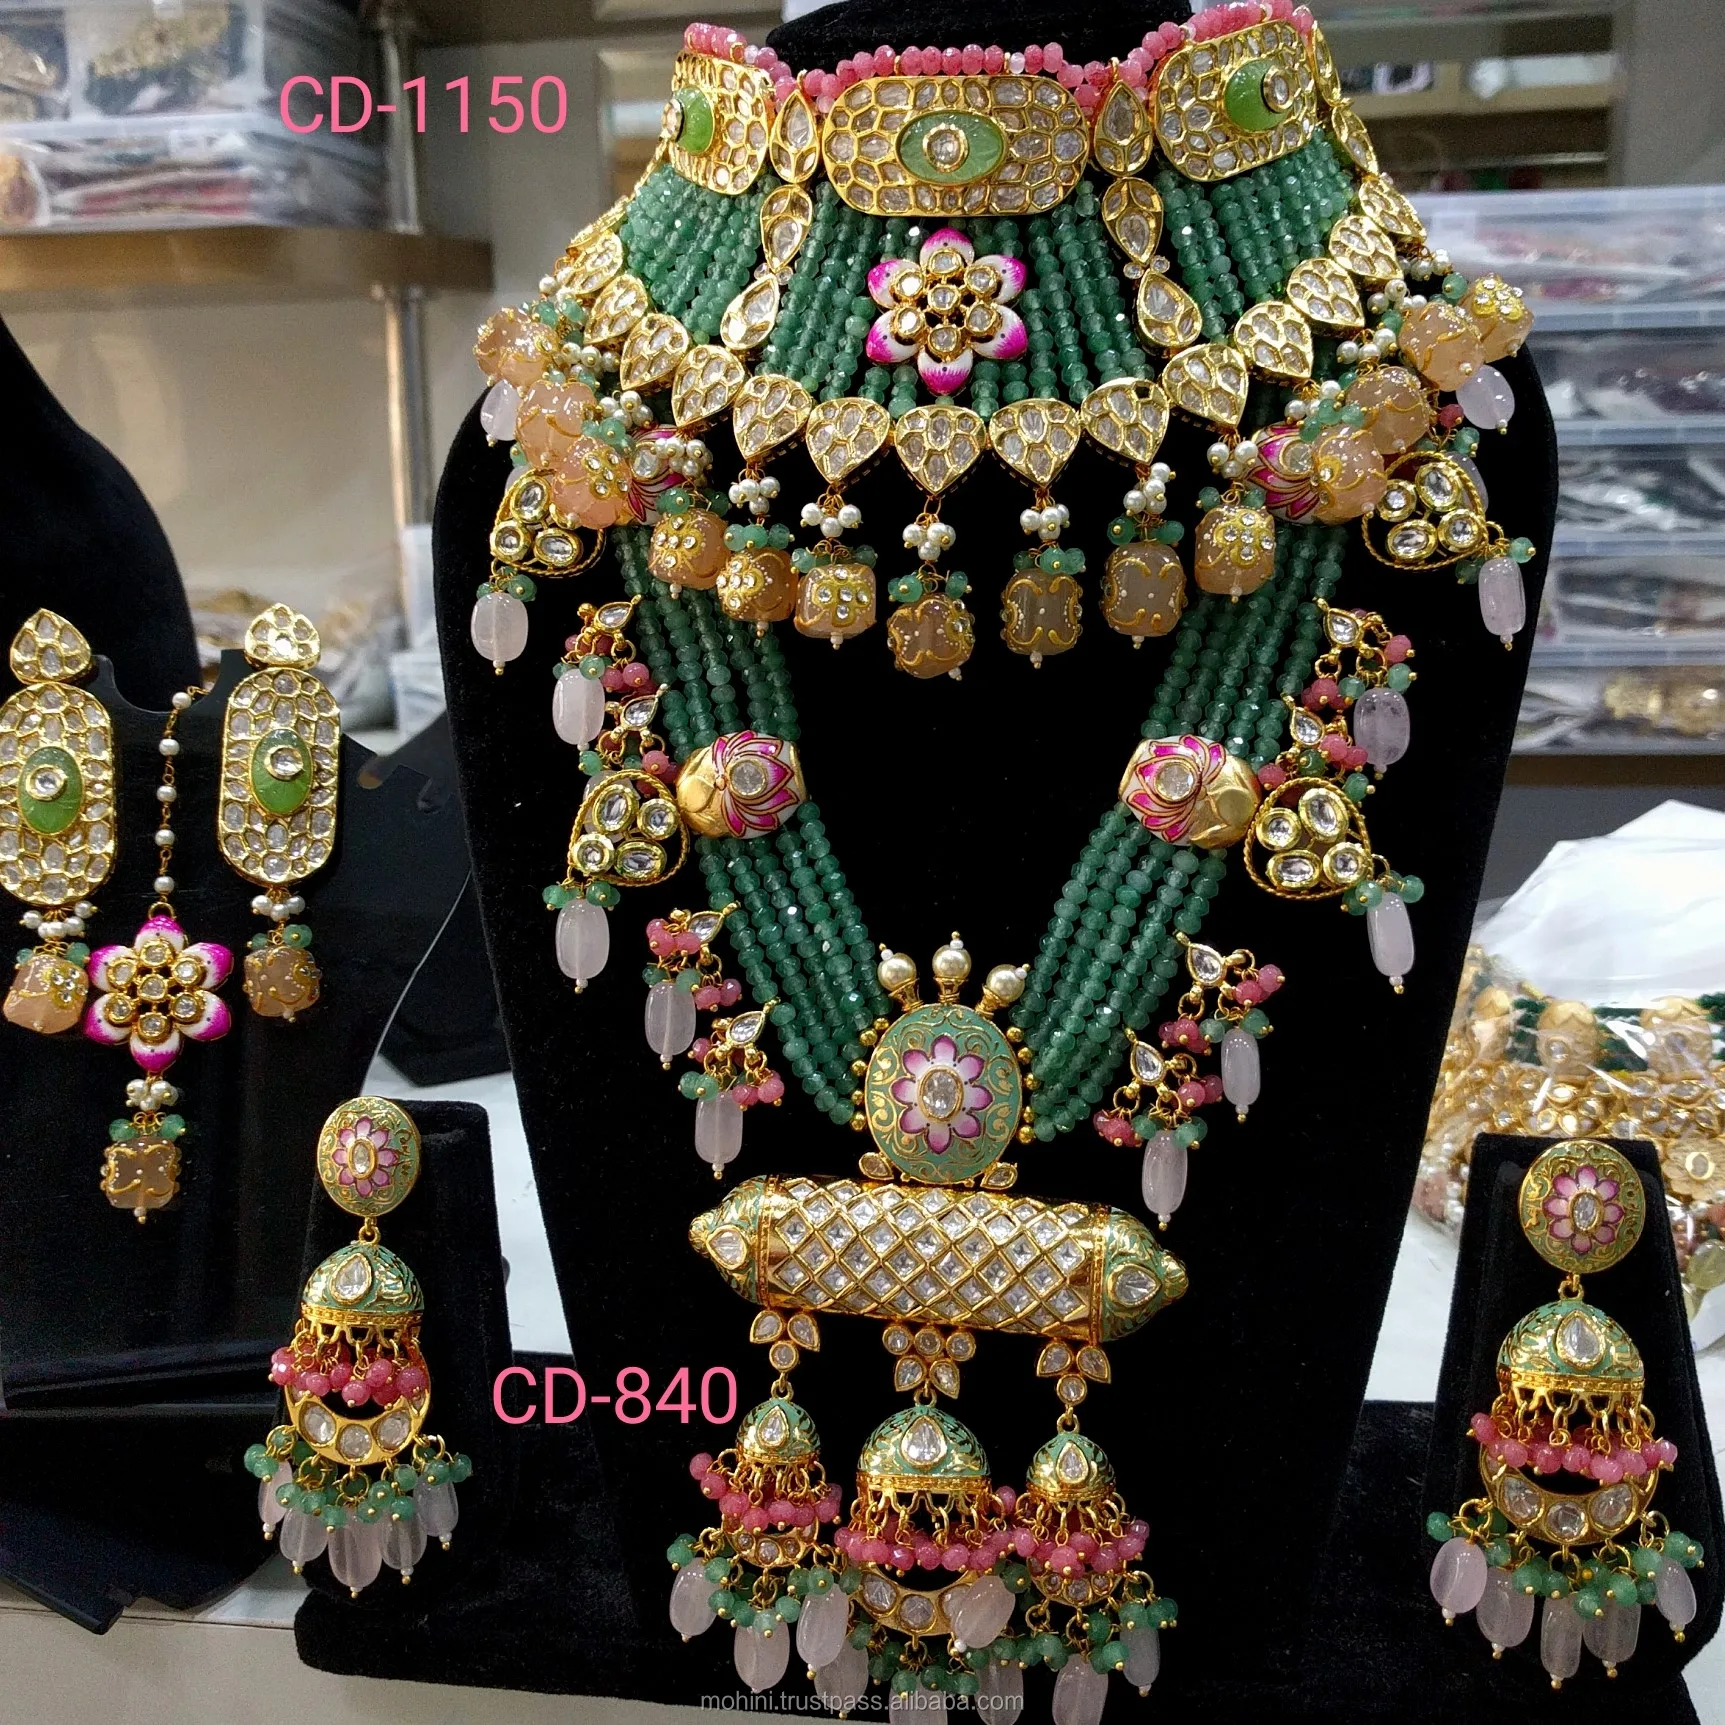 Details about   Bridal  Wedding Meena Kudan Gold Plated Fashion Handmade Jewelry Necklace Sets 